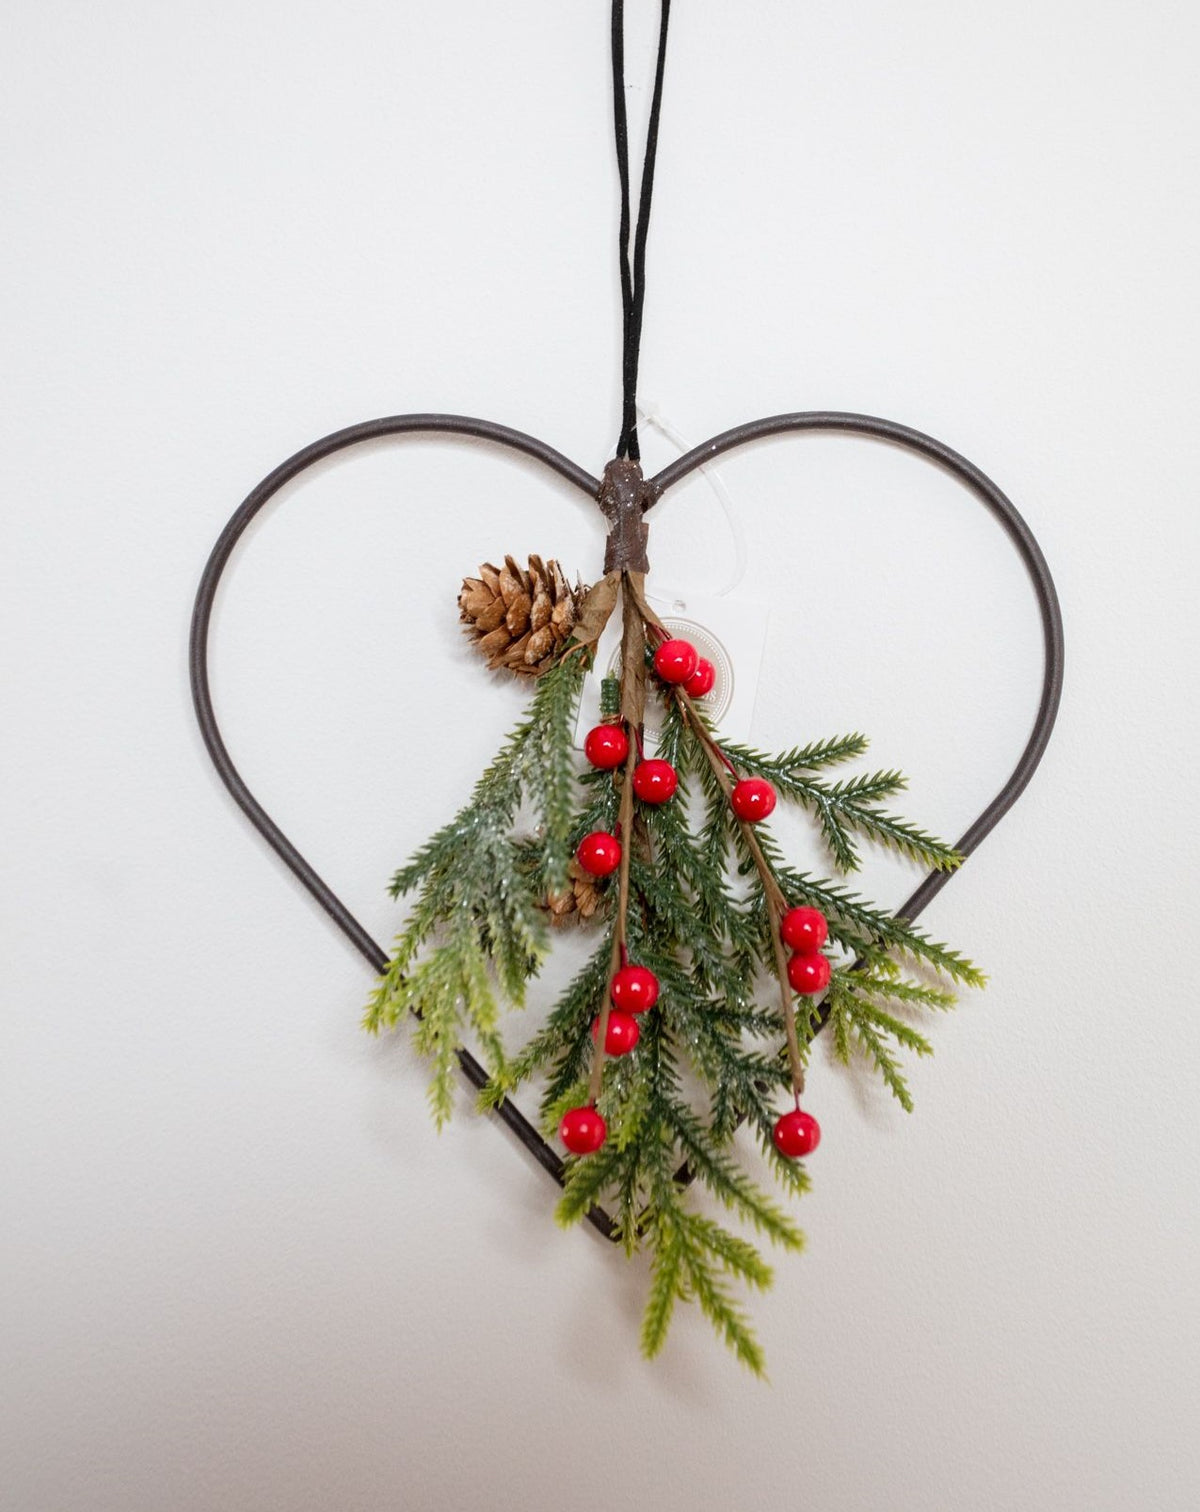 Small Wire Hanging Heart With Greenery Detail